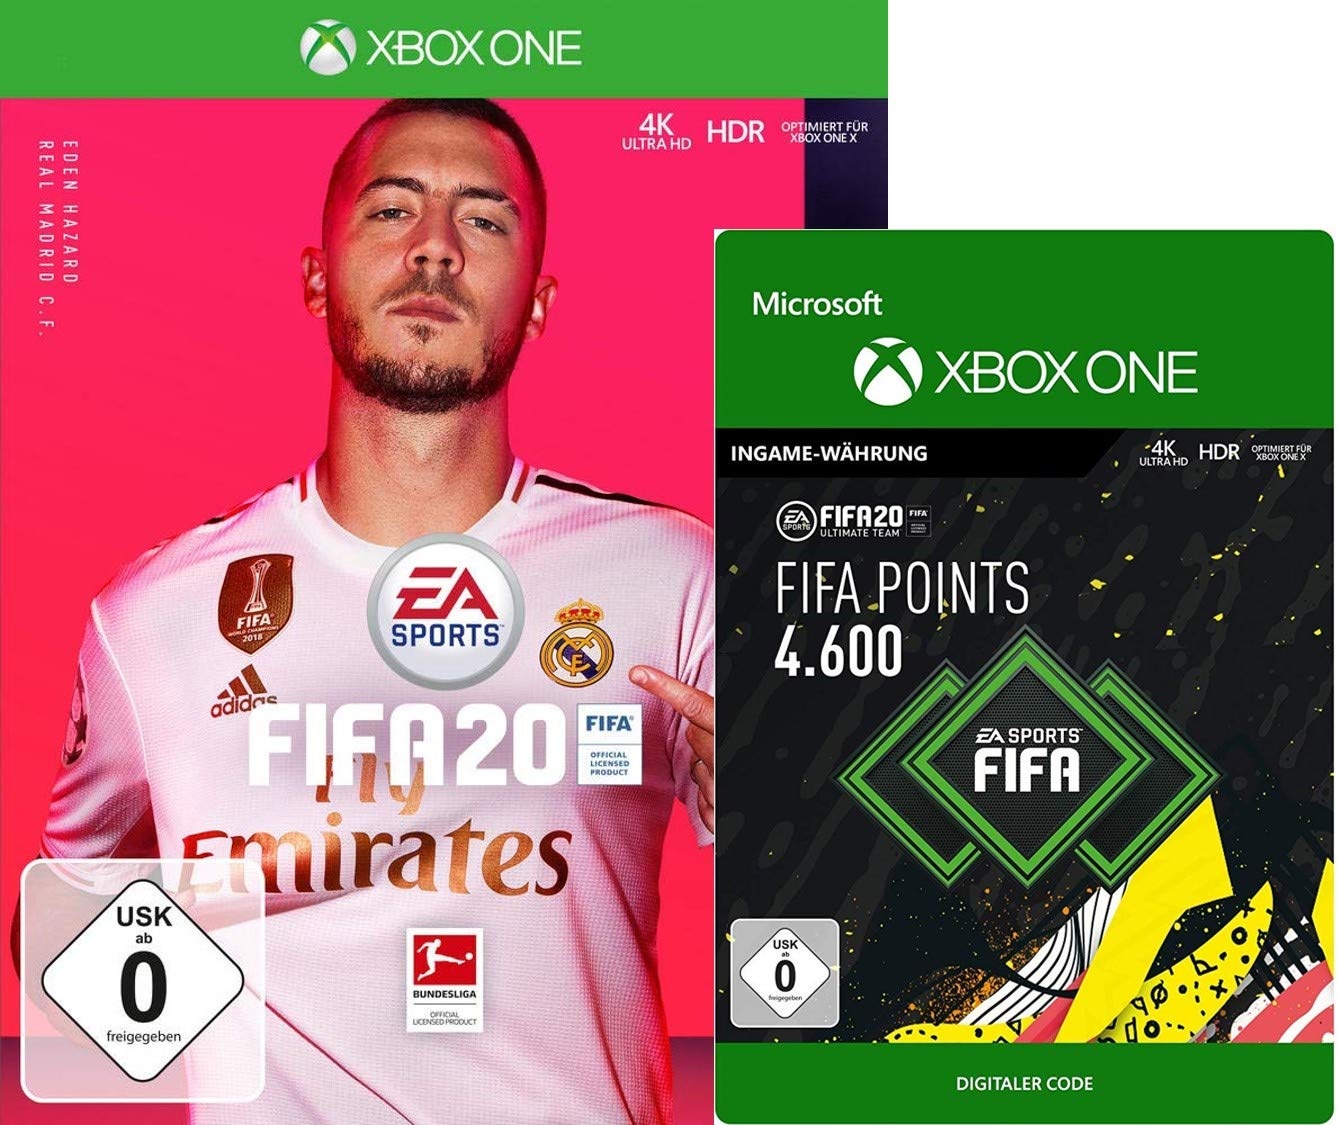 FIFA 20 - Standard Edition - [Xbox One] + FIFA 20 Ultimate Team - 4600 FIFA Points - Xbox One - Download Code